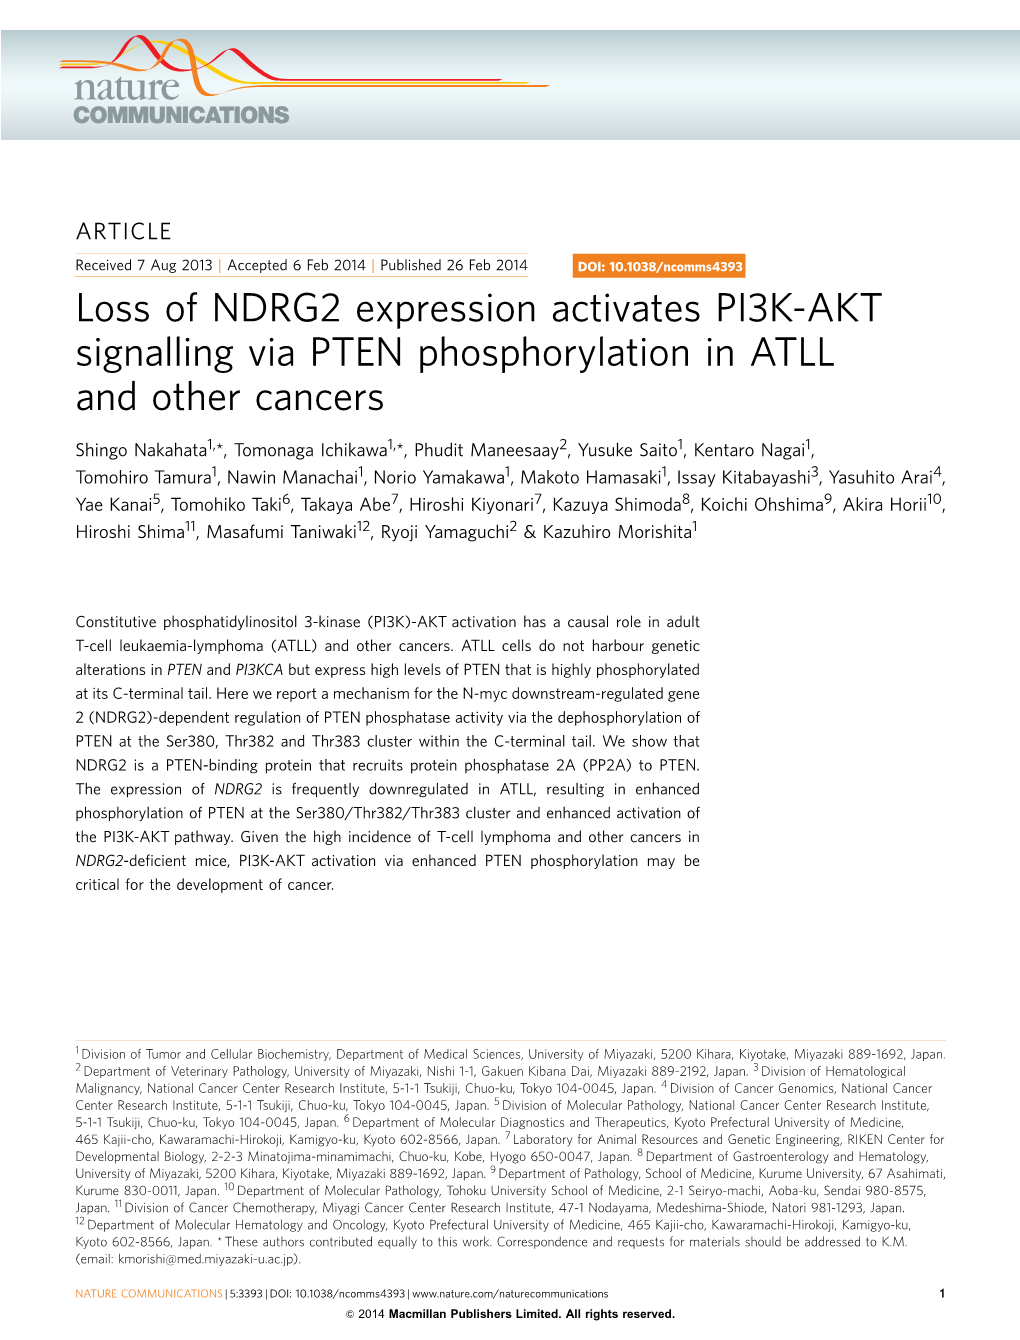 Loss of NDRG2 Expression Activates PI3K-AKT Signalling Via PTEN Phosphorylation in ATLL and Other Cancers